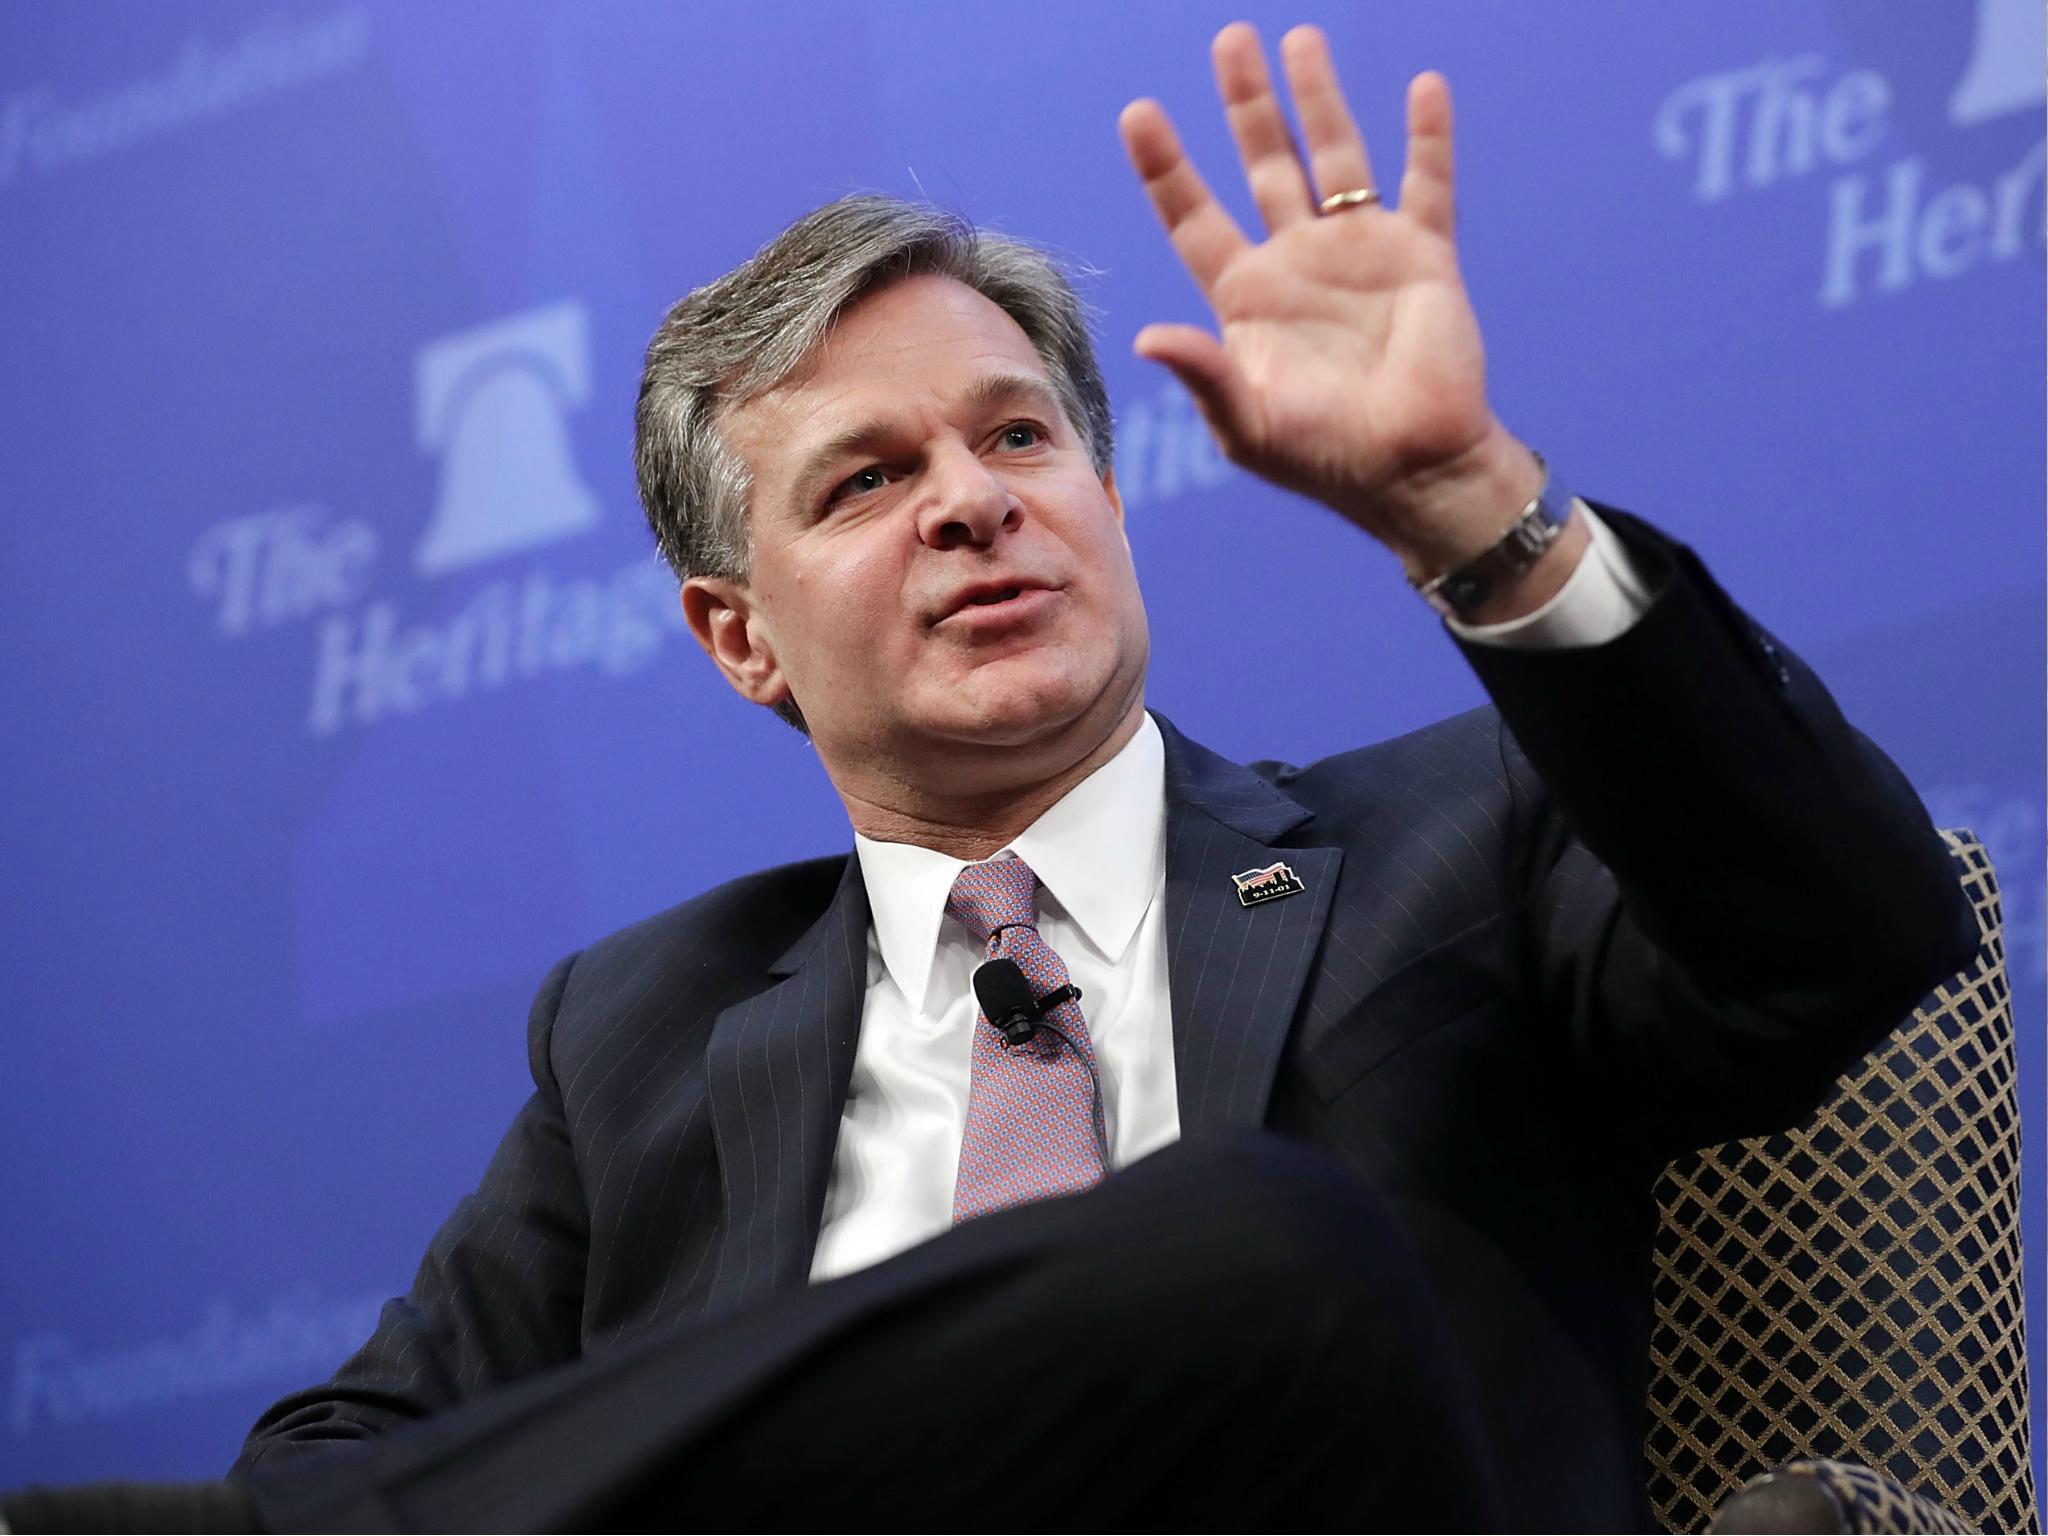 Federal Bureau of Investigation Director Christopher Wray responded to US President Donald Trump's criticism of his agency via an email to bureau staff.